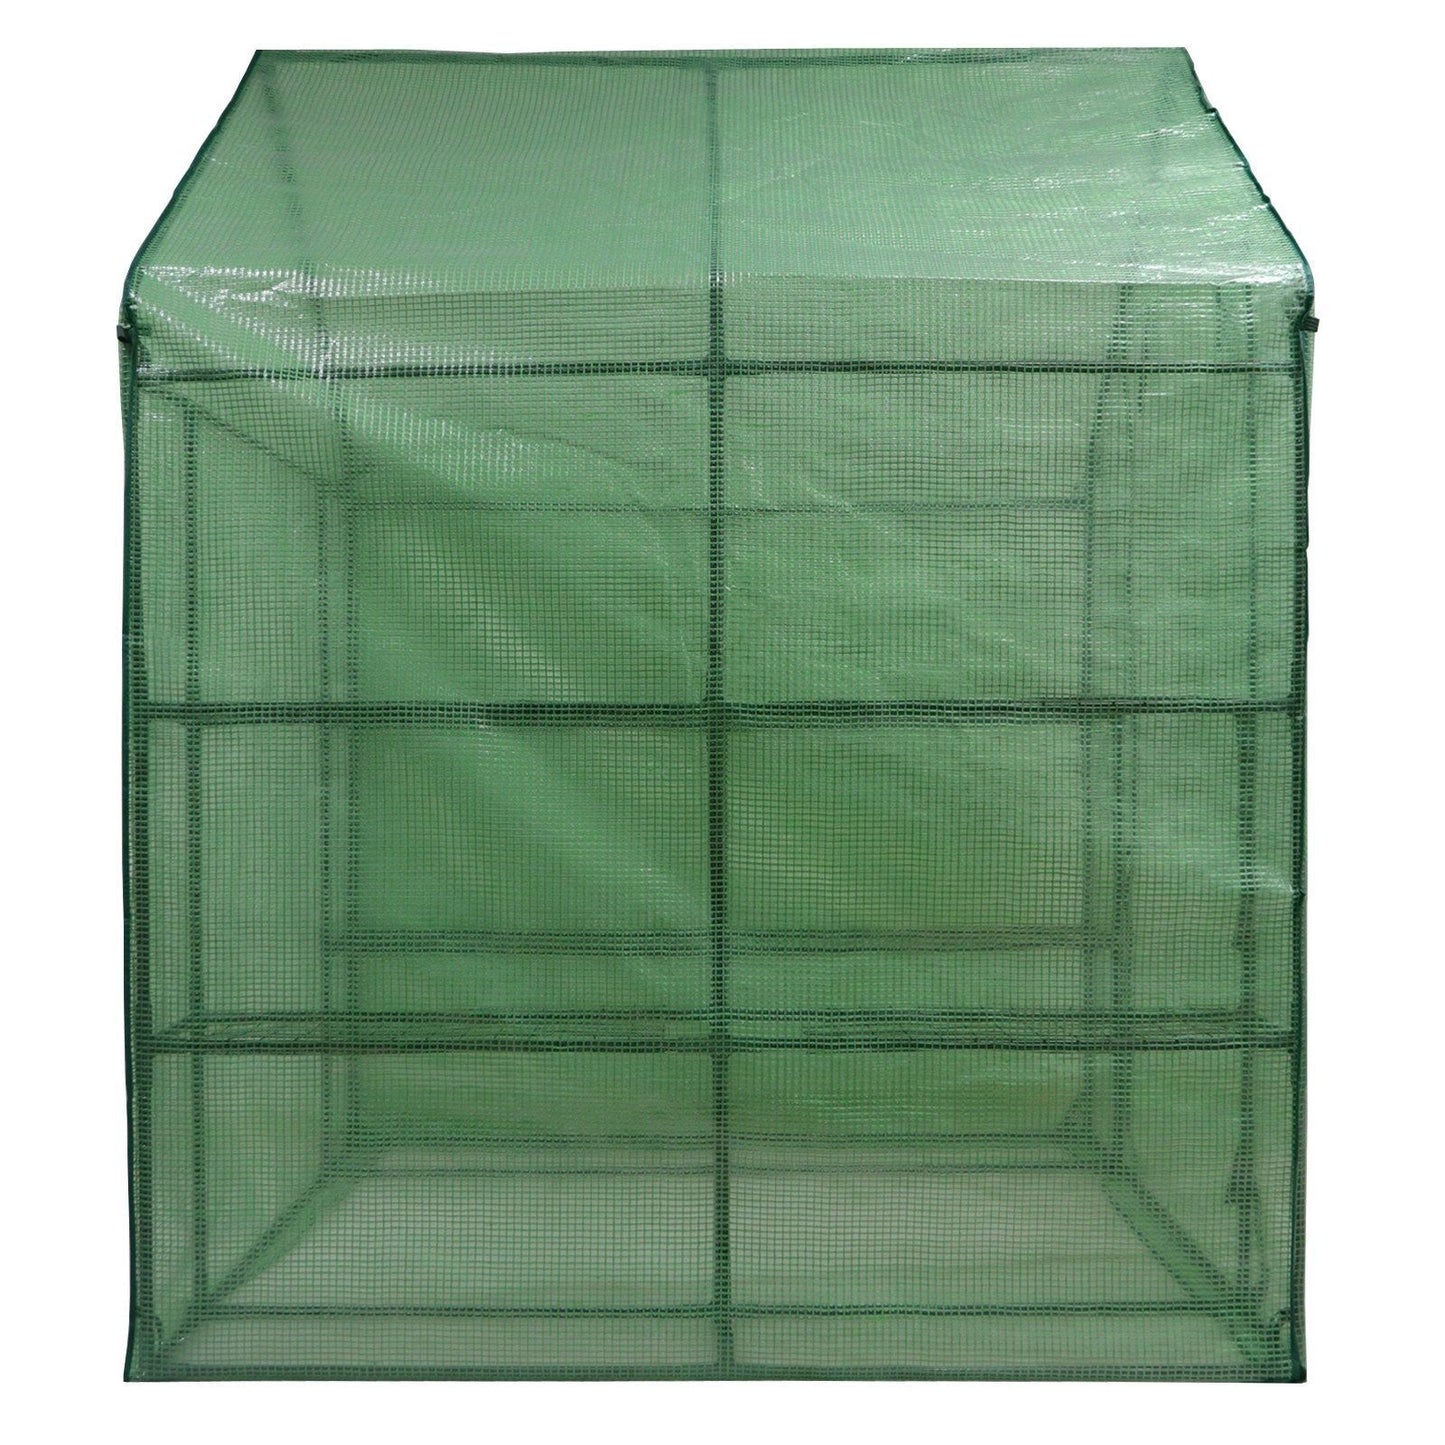 Greenhouse - Large Walk In Portable Indoor Outdoor Greenhouse